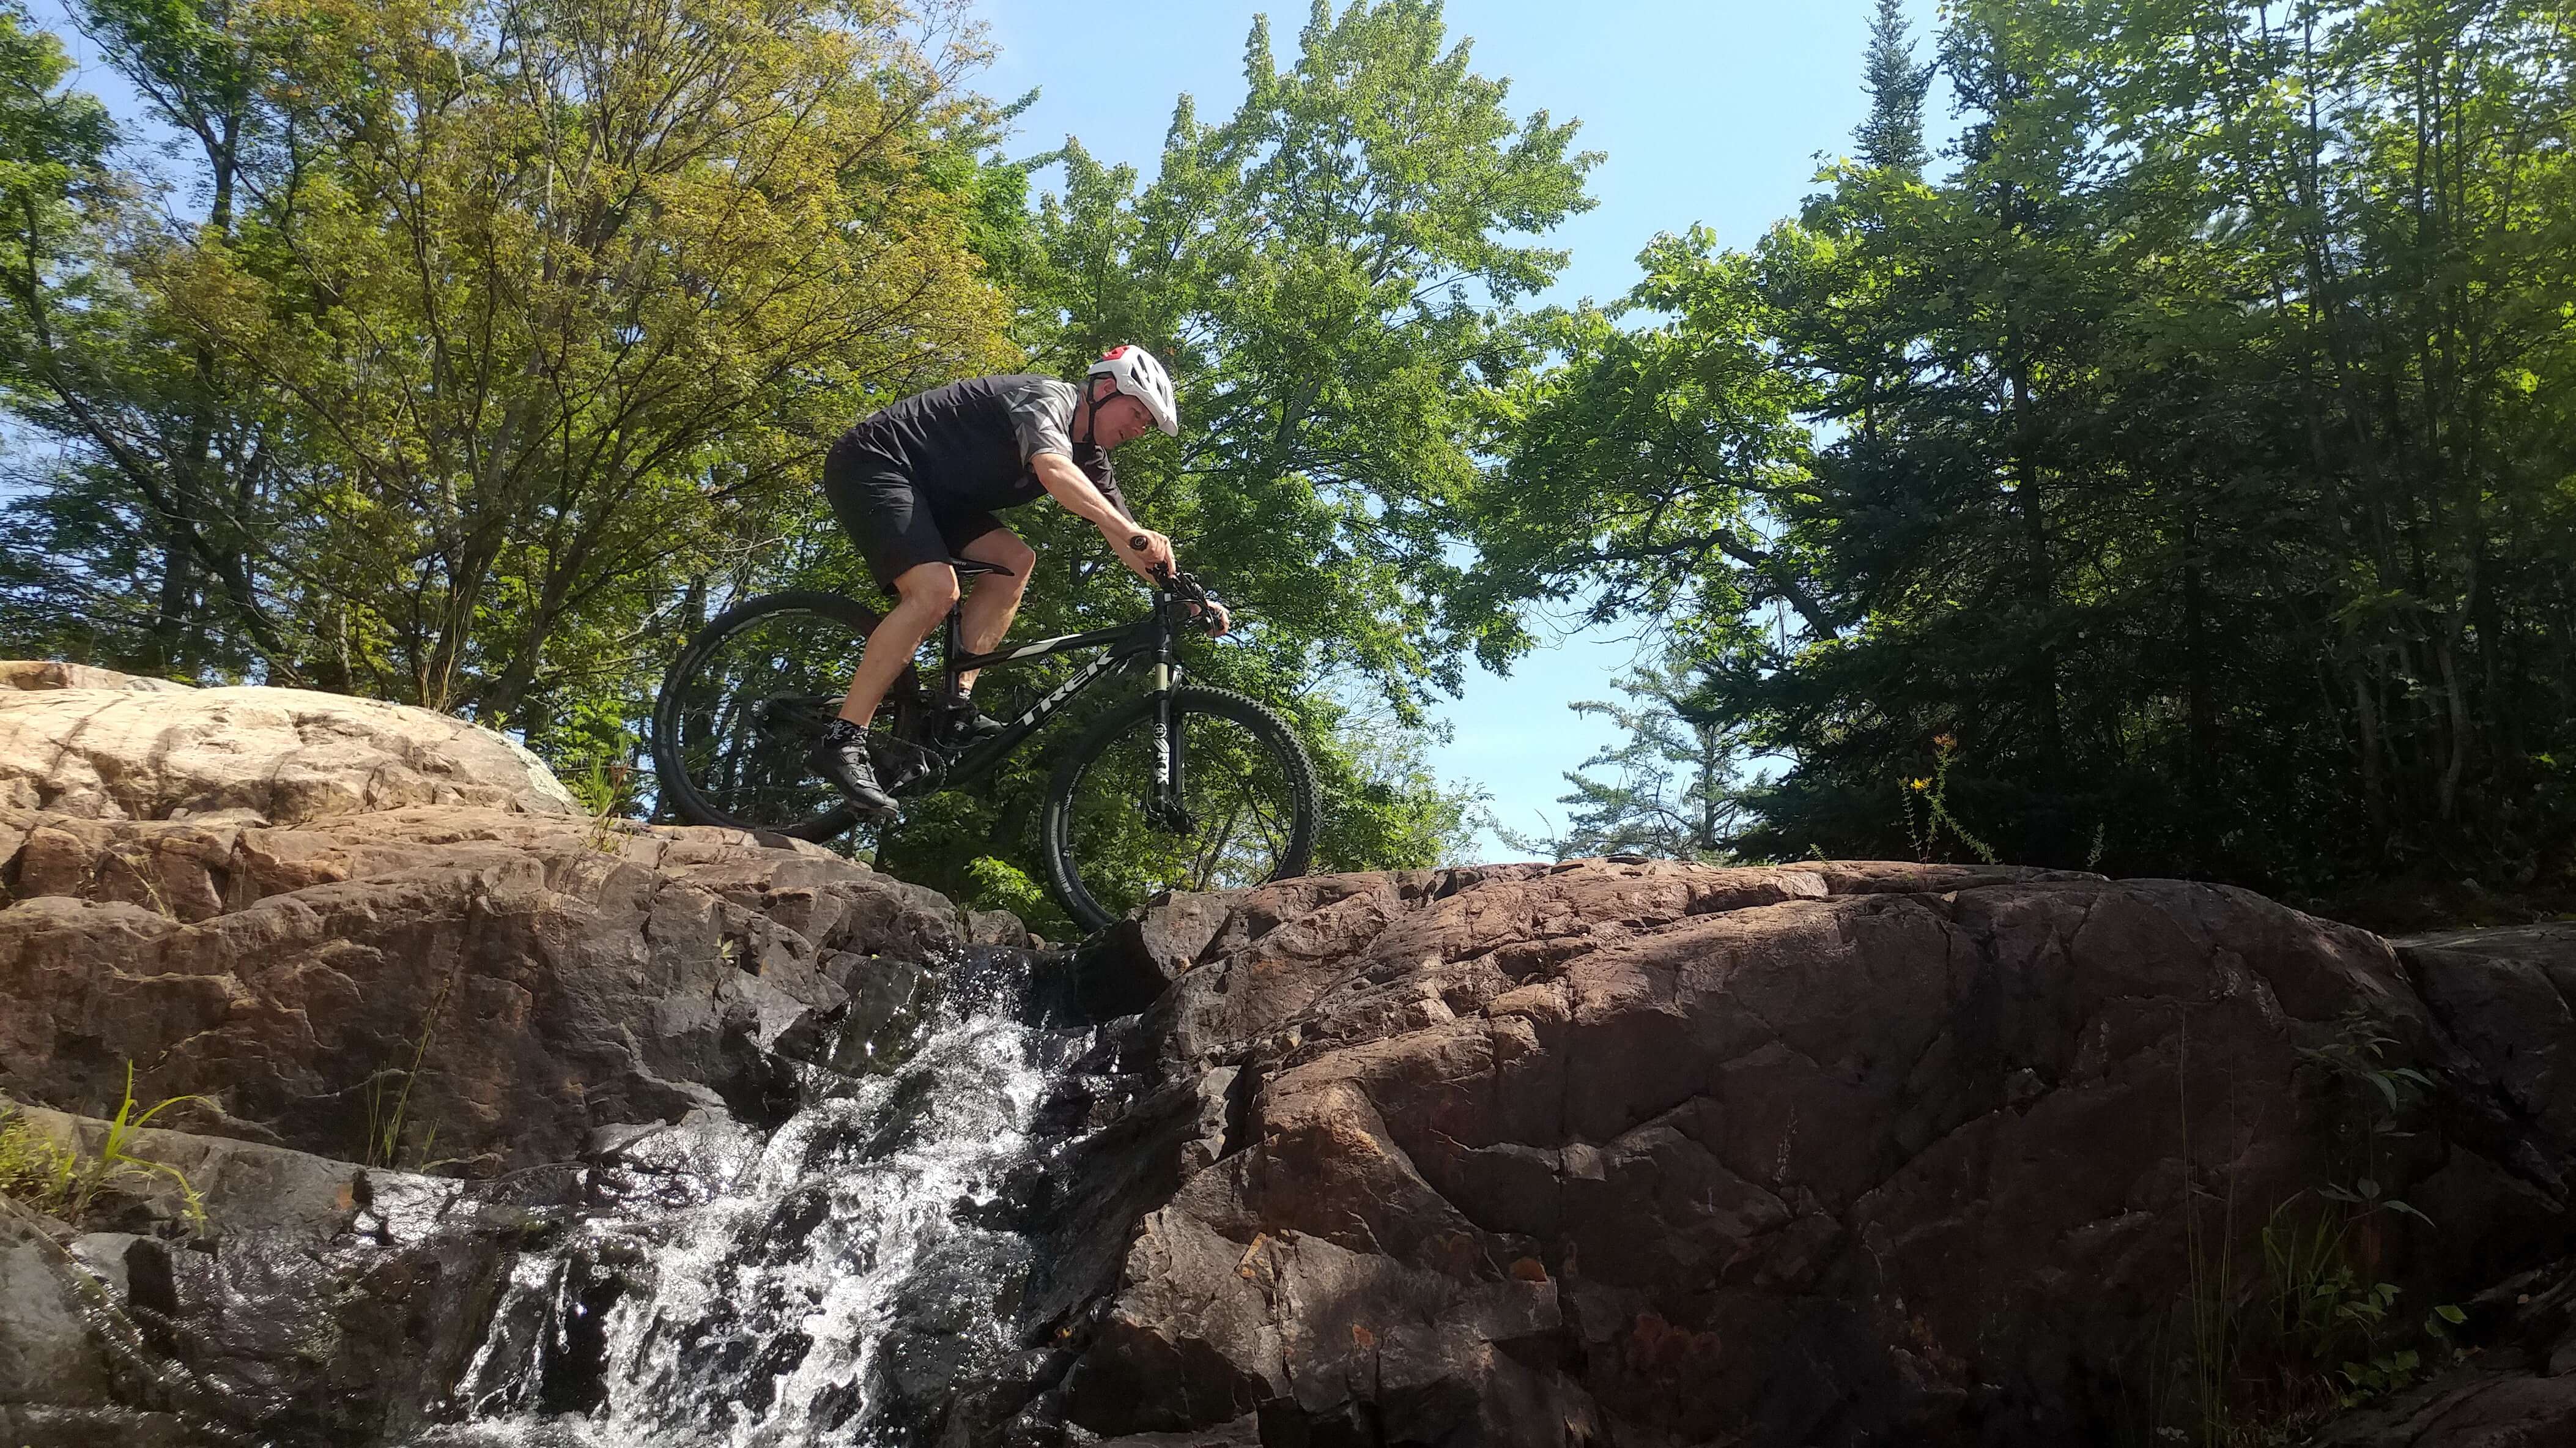 Riding above a waterfall